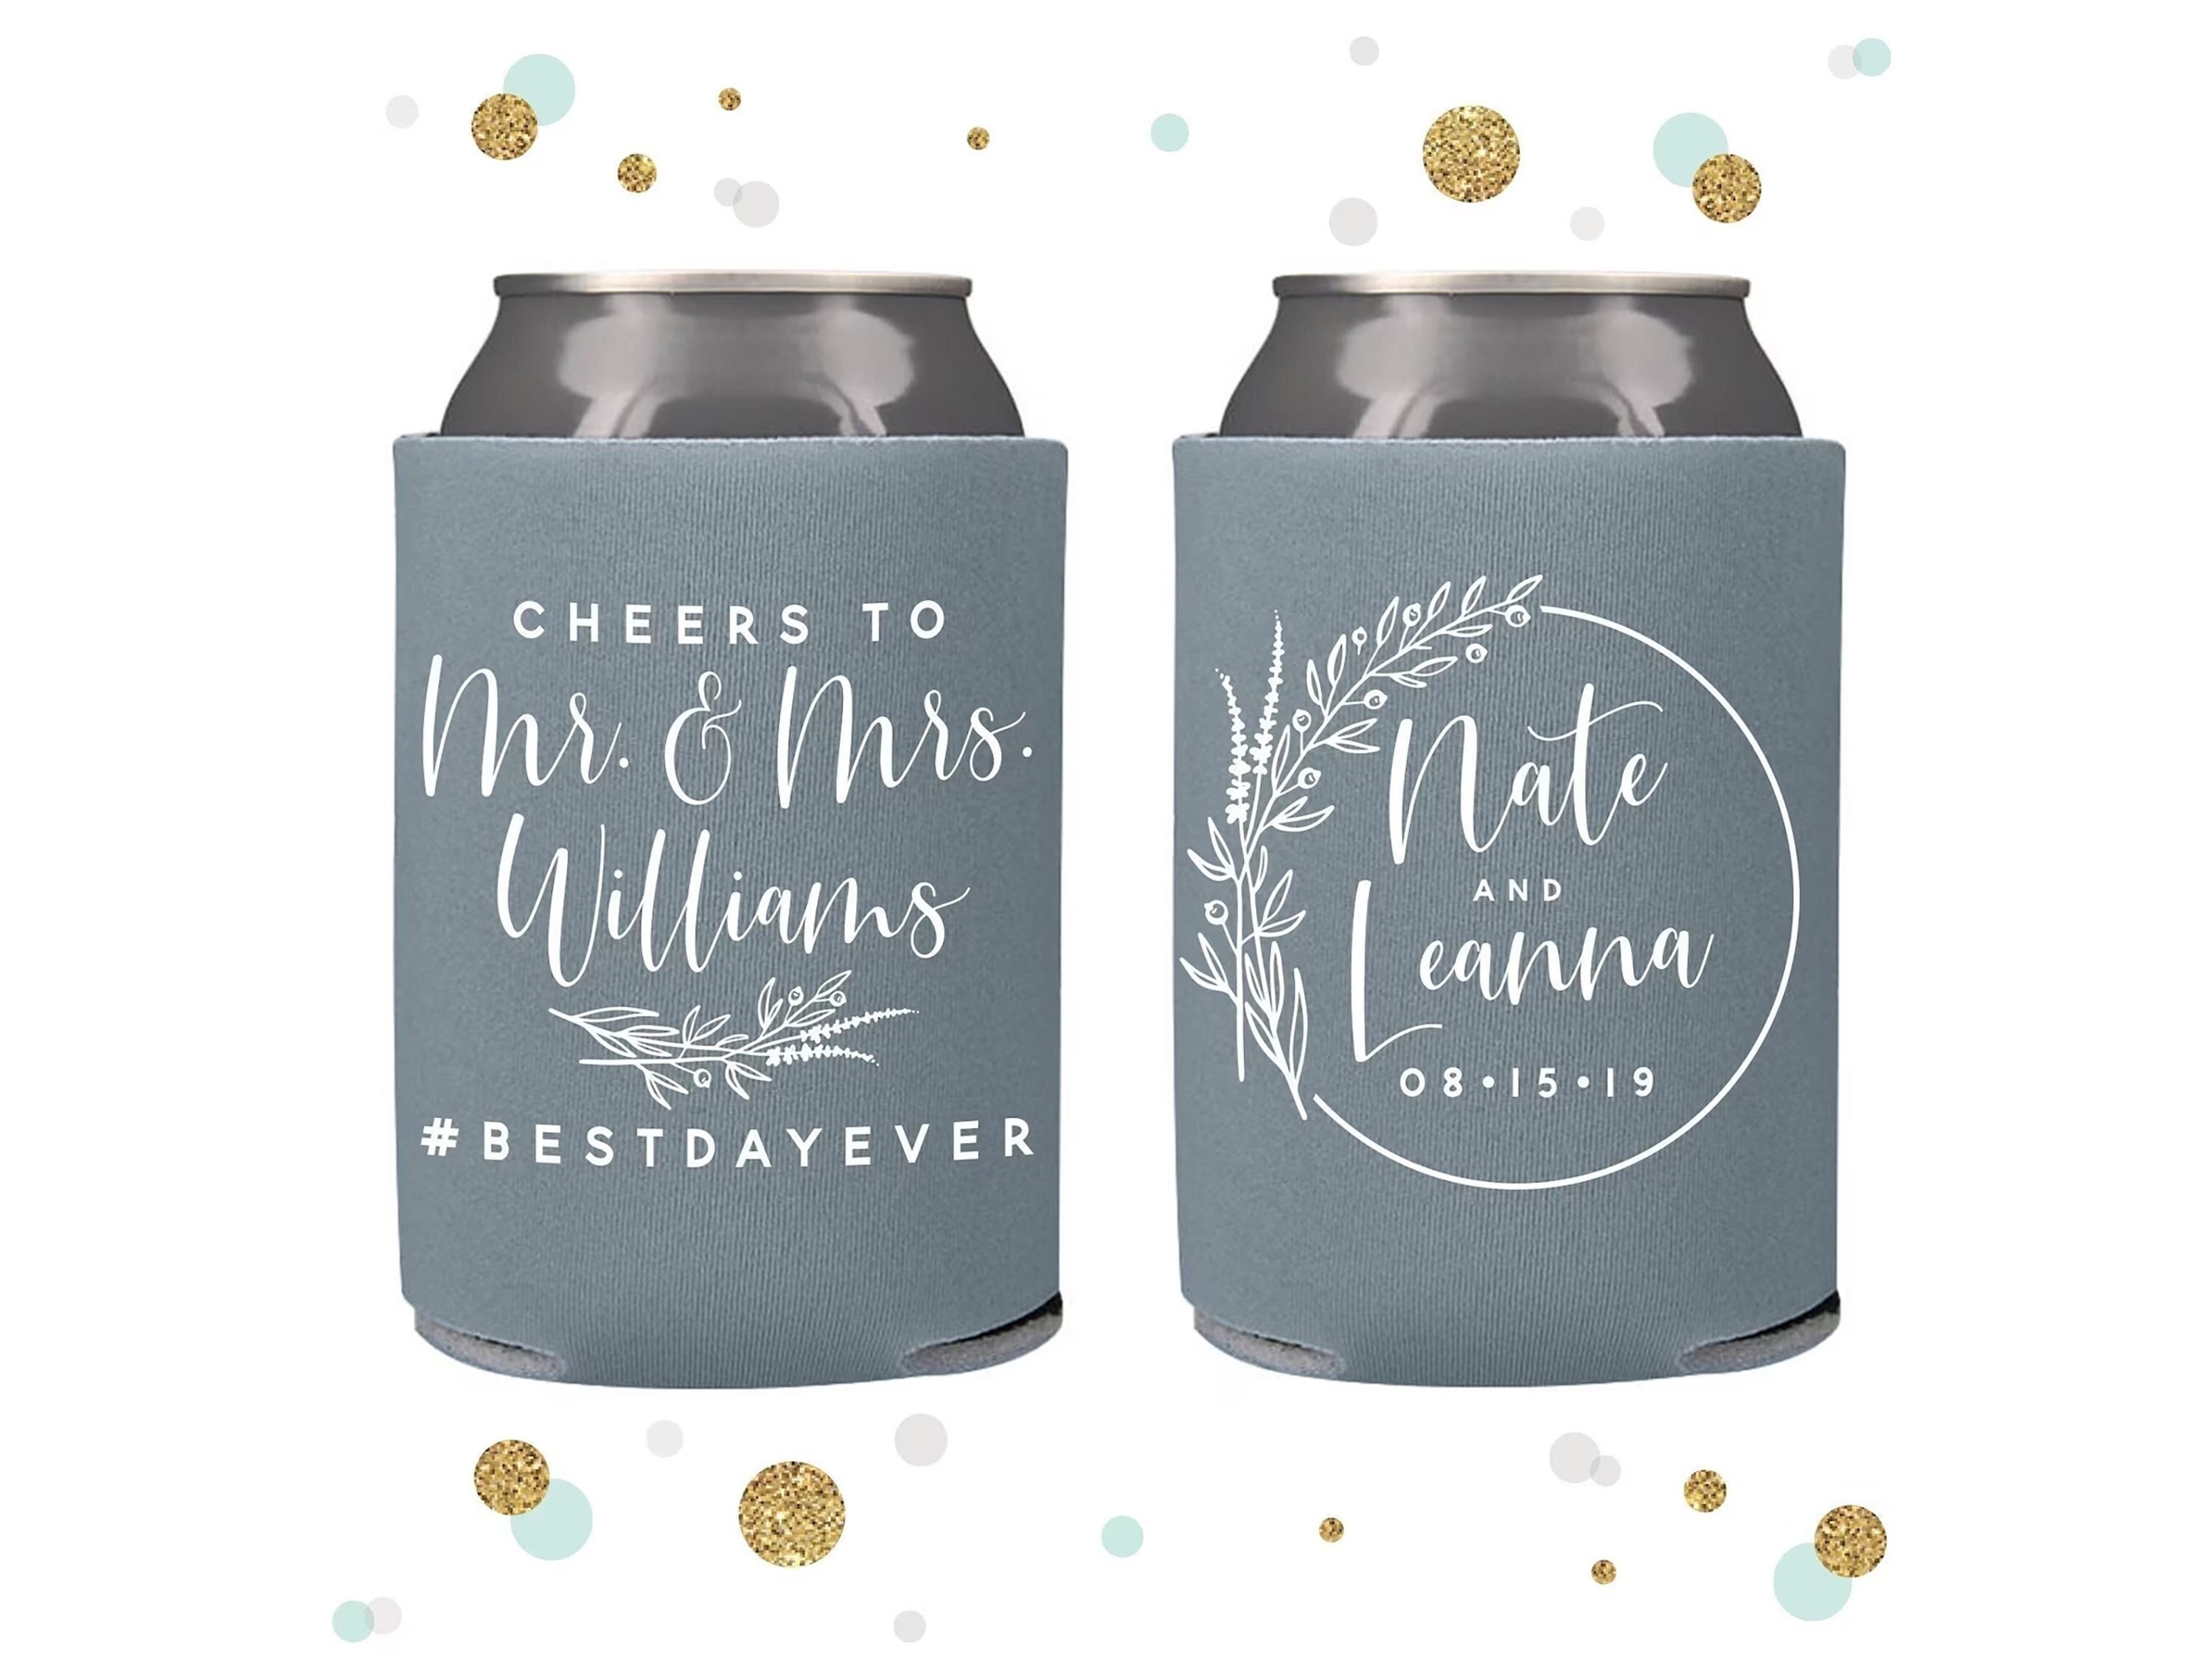 Wedding Can Cooler 163R Our Greatest Adventure Continues Custom Wedding  Favors, Insulated, Can Holder, Wedding Favor, Beer Holder 